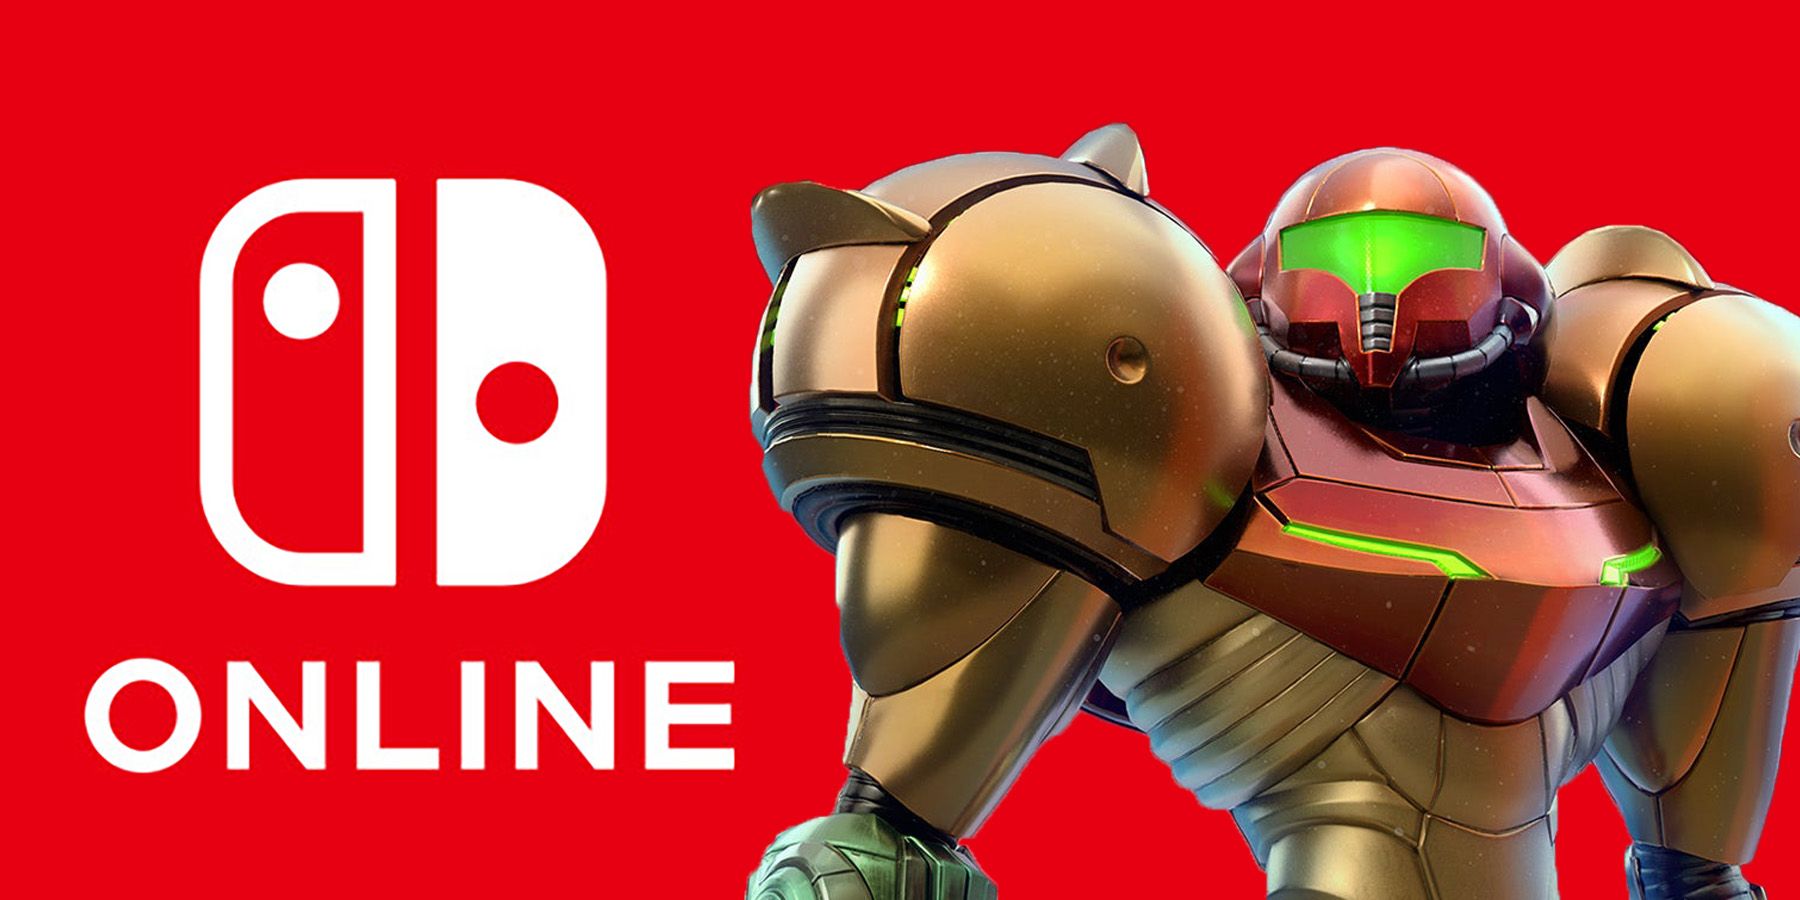 samus from metroid prime remastered standing next to the nintendo switch online logo